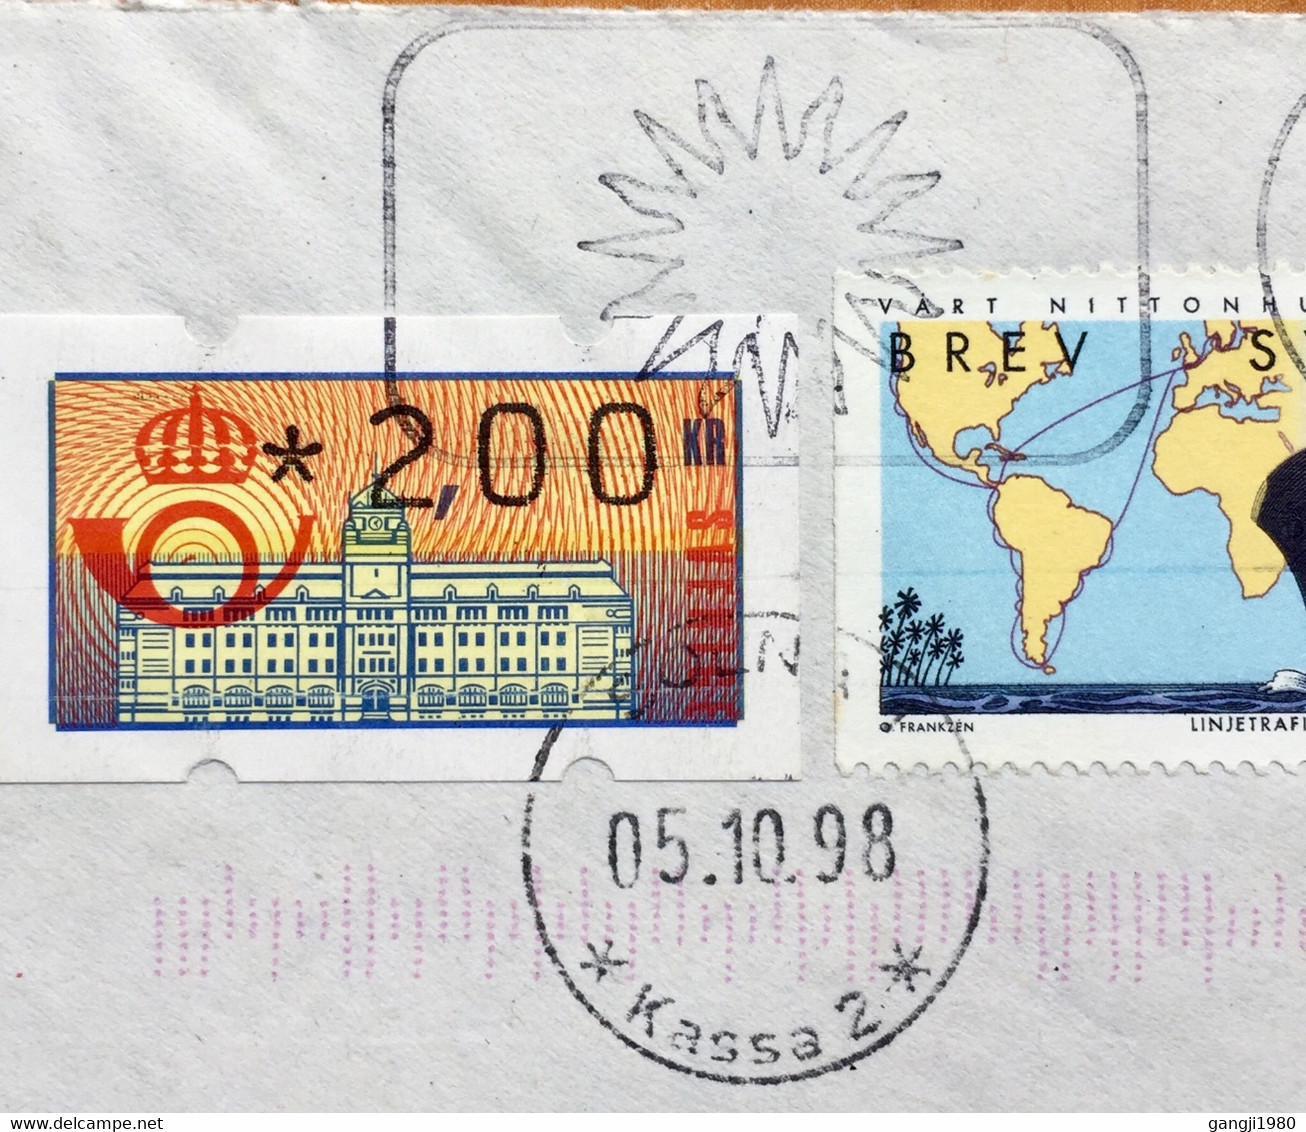 SWEDEN 1998, AIRMAIL COVER TO UK ATM STAMP ,SELF ADHESIVE STAMPS ,SHIP ,GLOBE,POST HORN ,BUILDING ,PICTURAL CANCELLATIO - Brieven En Documenten